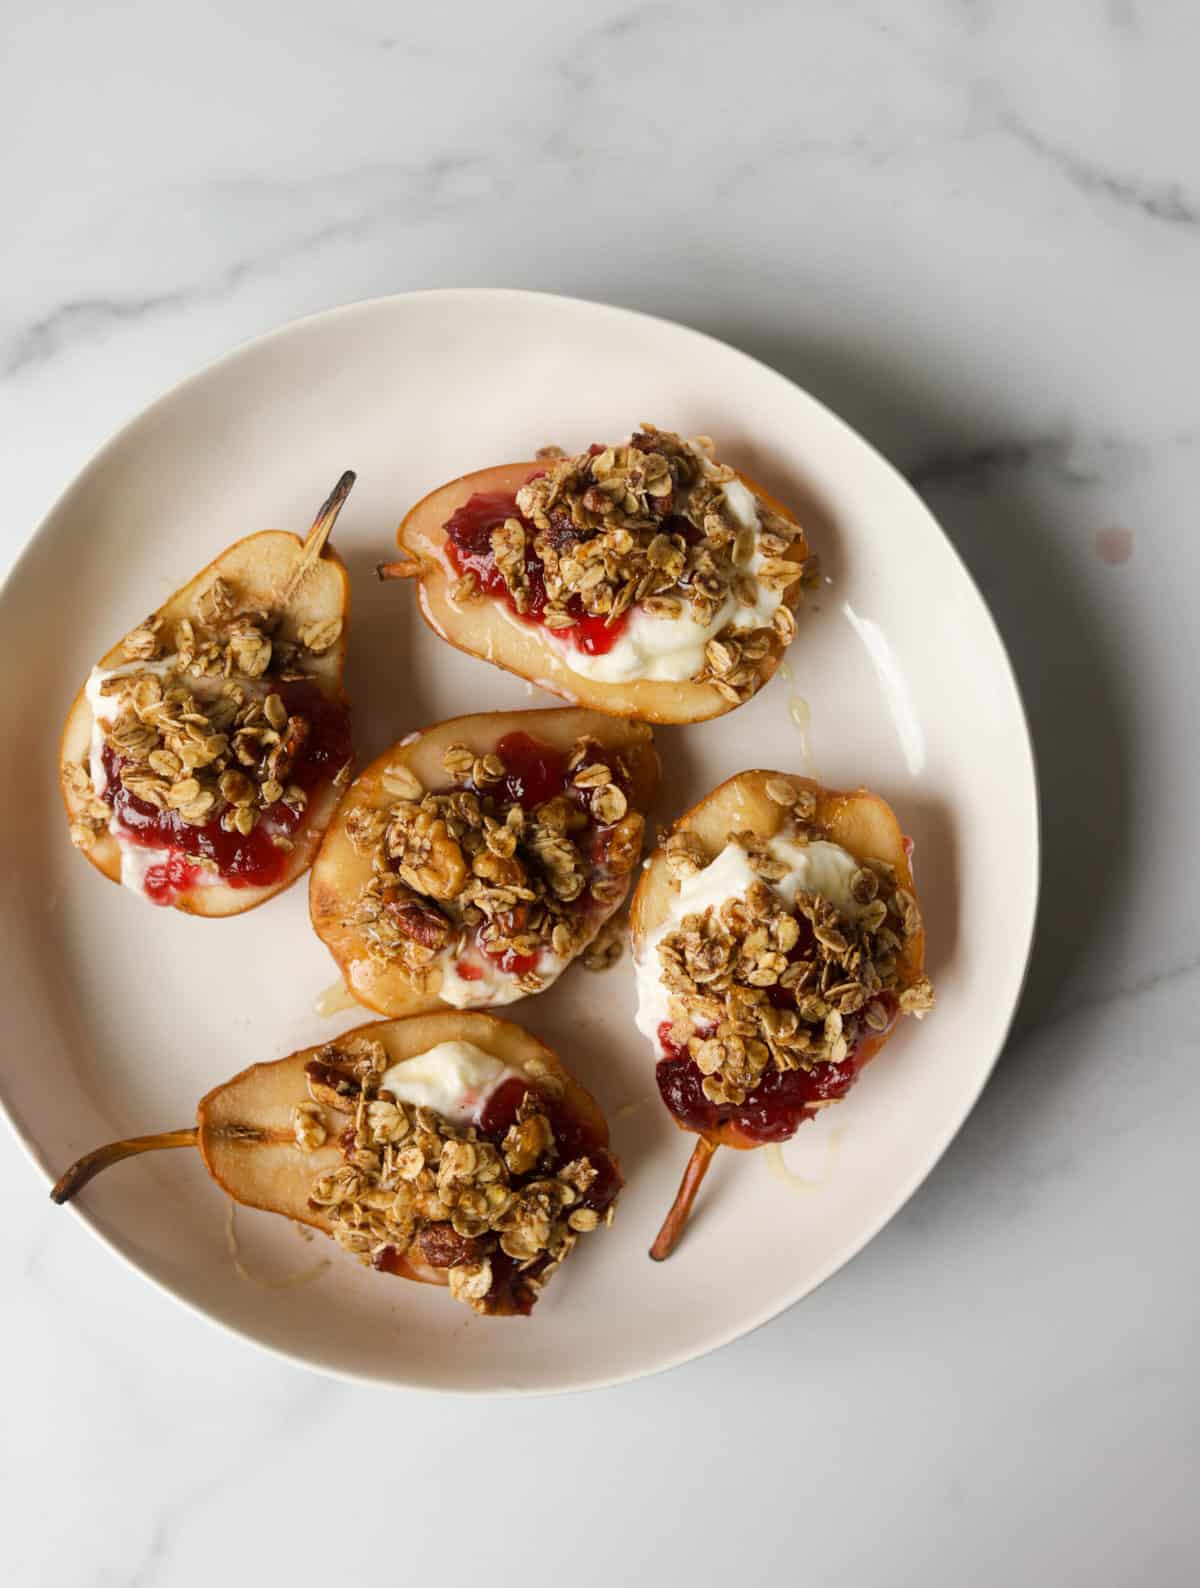 A birds eye view of a plate filled with cranberry stuffed pears.